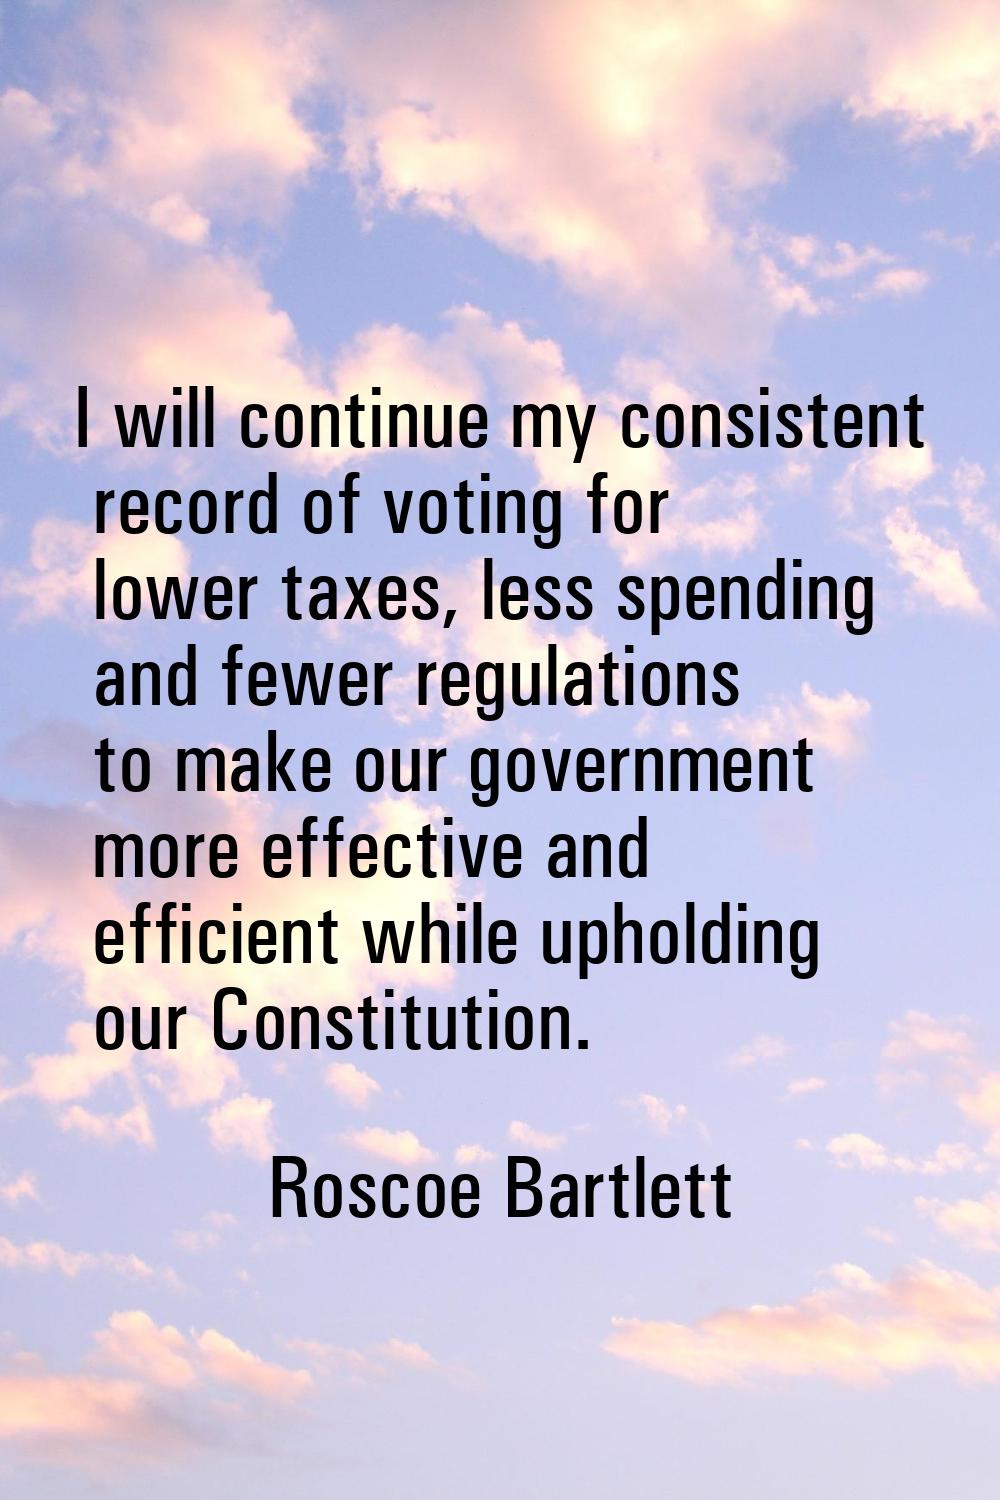 I will continue my consistent record of voting for lower taxes, less spending and fewer regulations